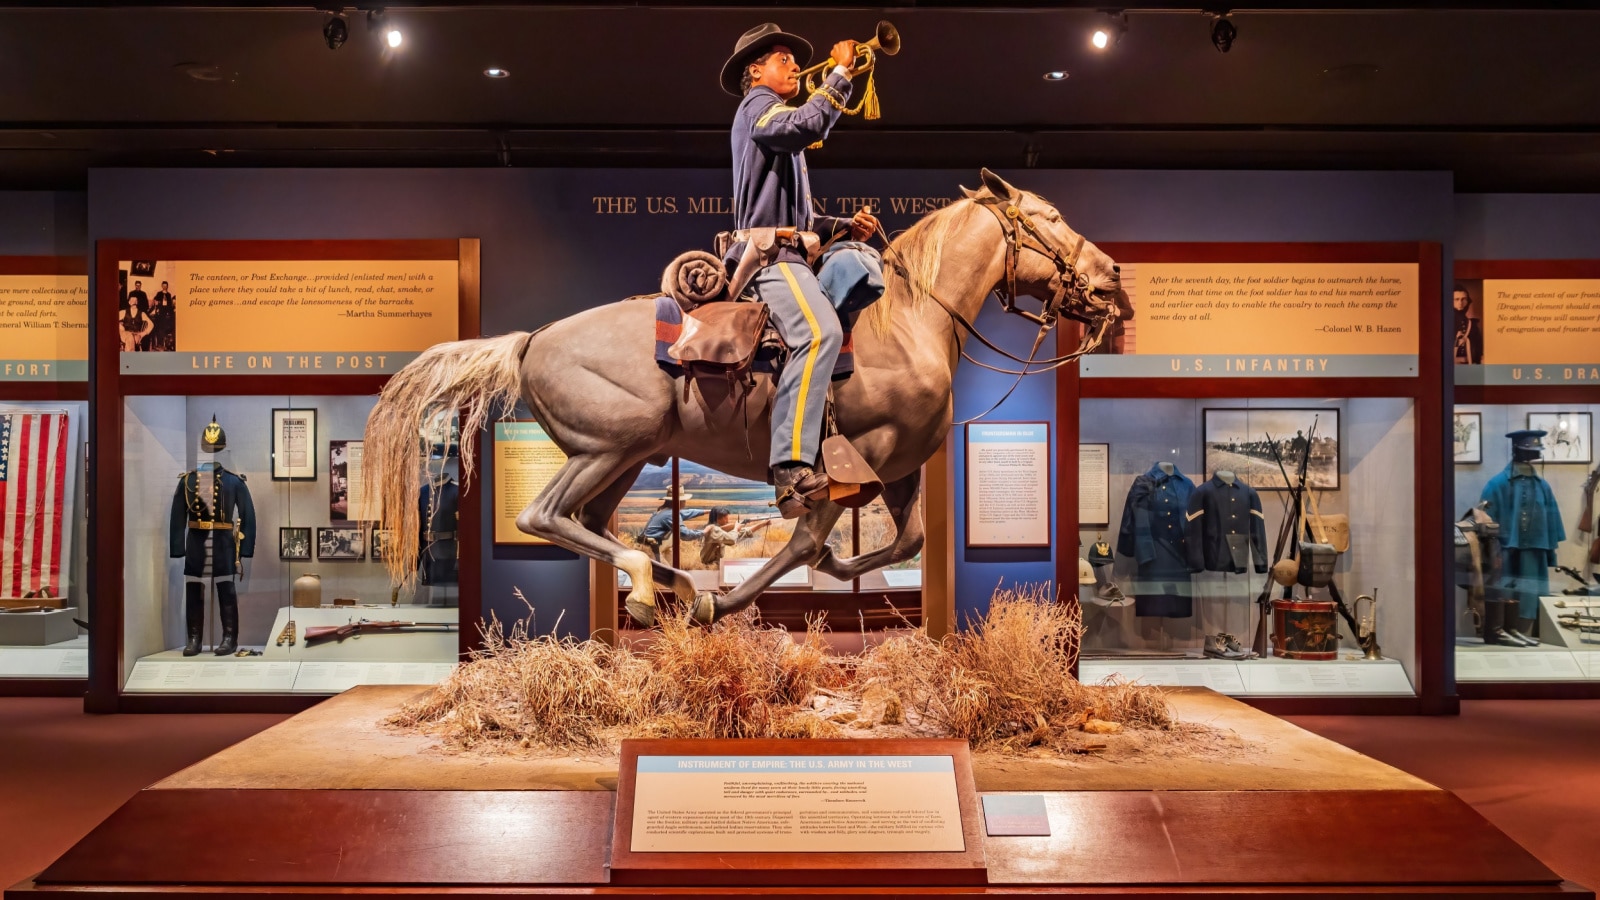 Oklahoma, FEB 27 2022 - Interior view of the National Cowboy and Western Heritage Museum